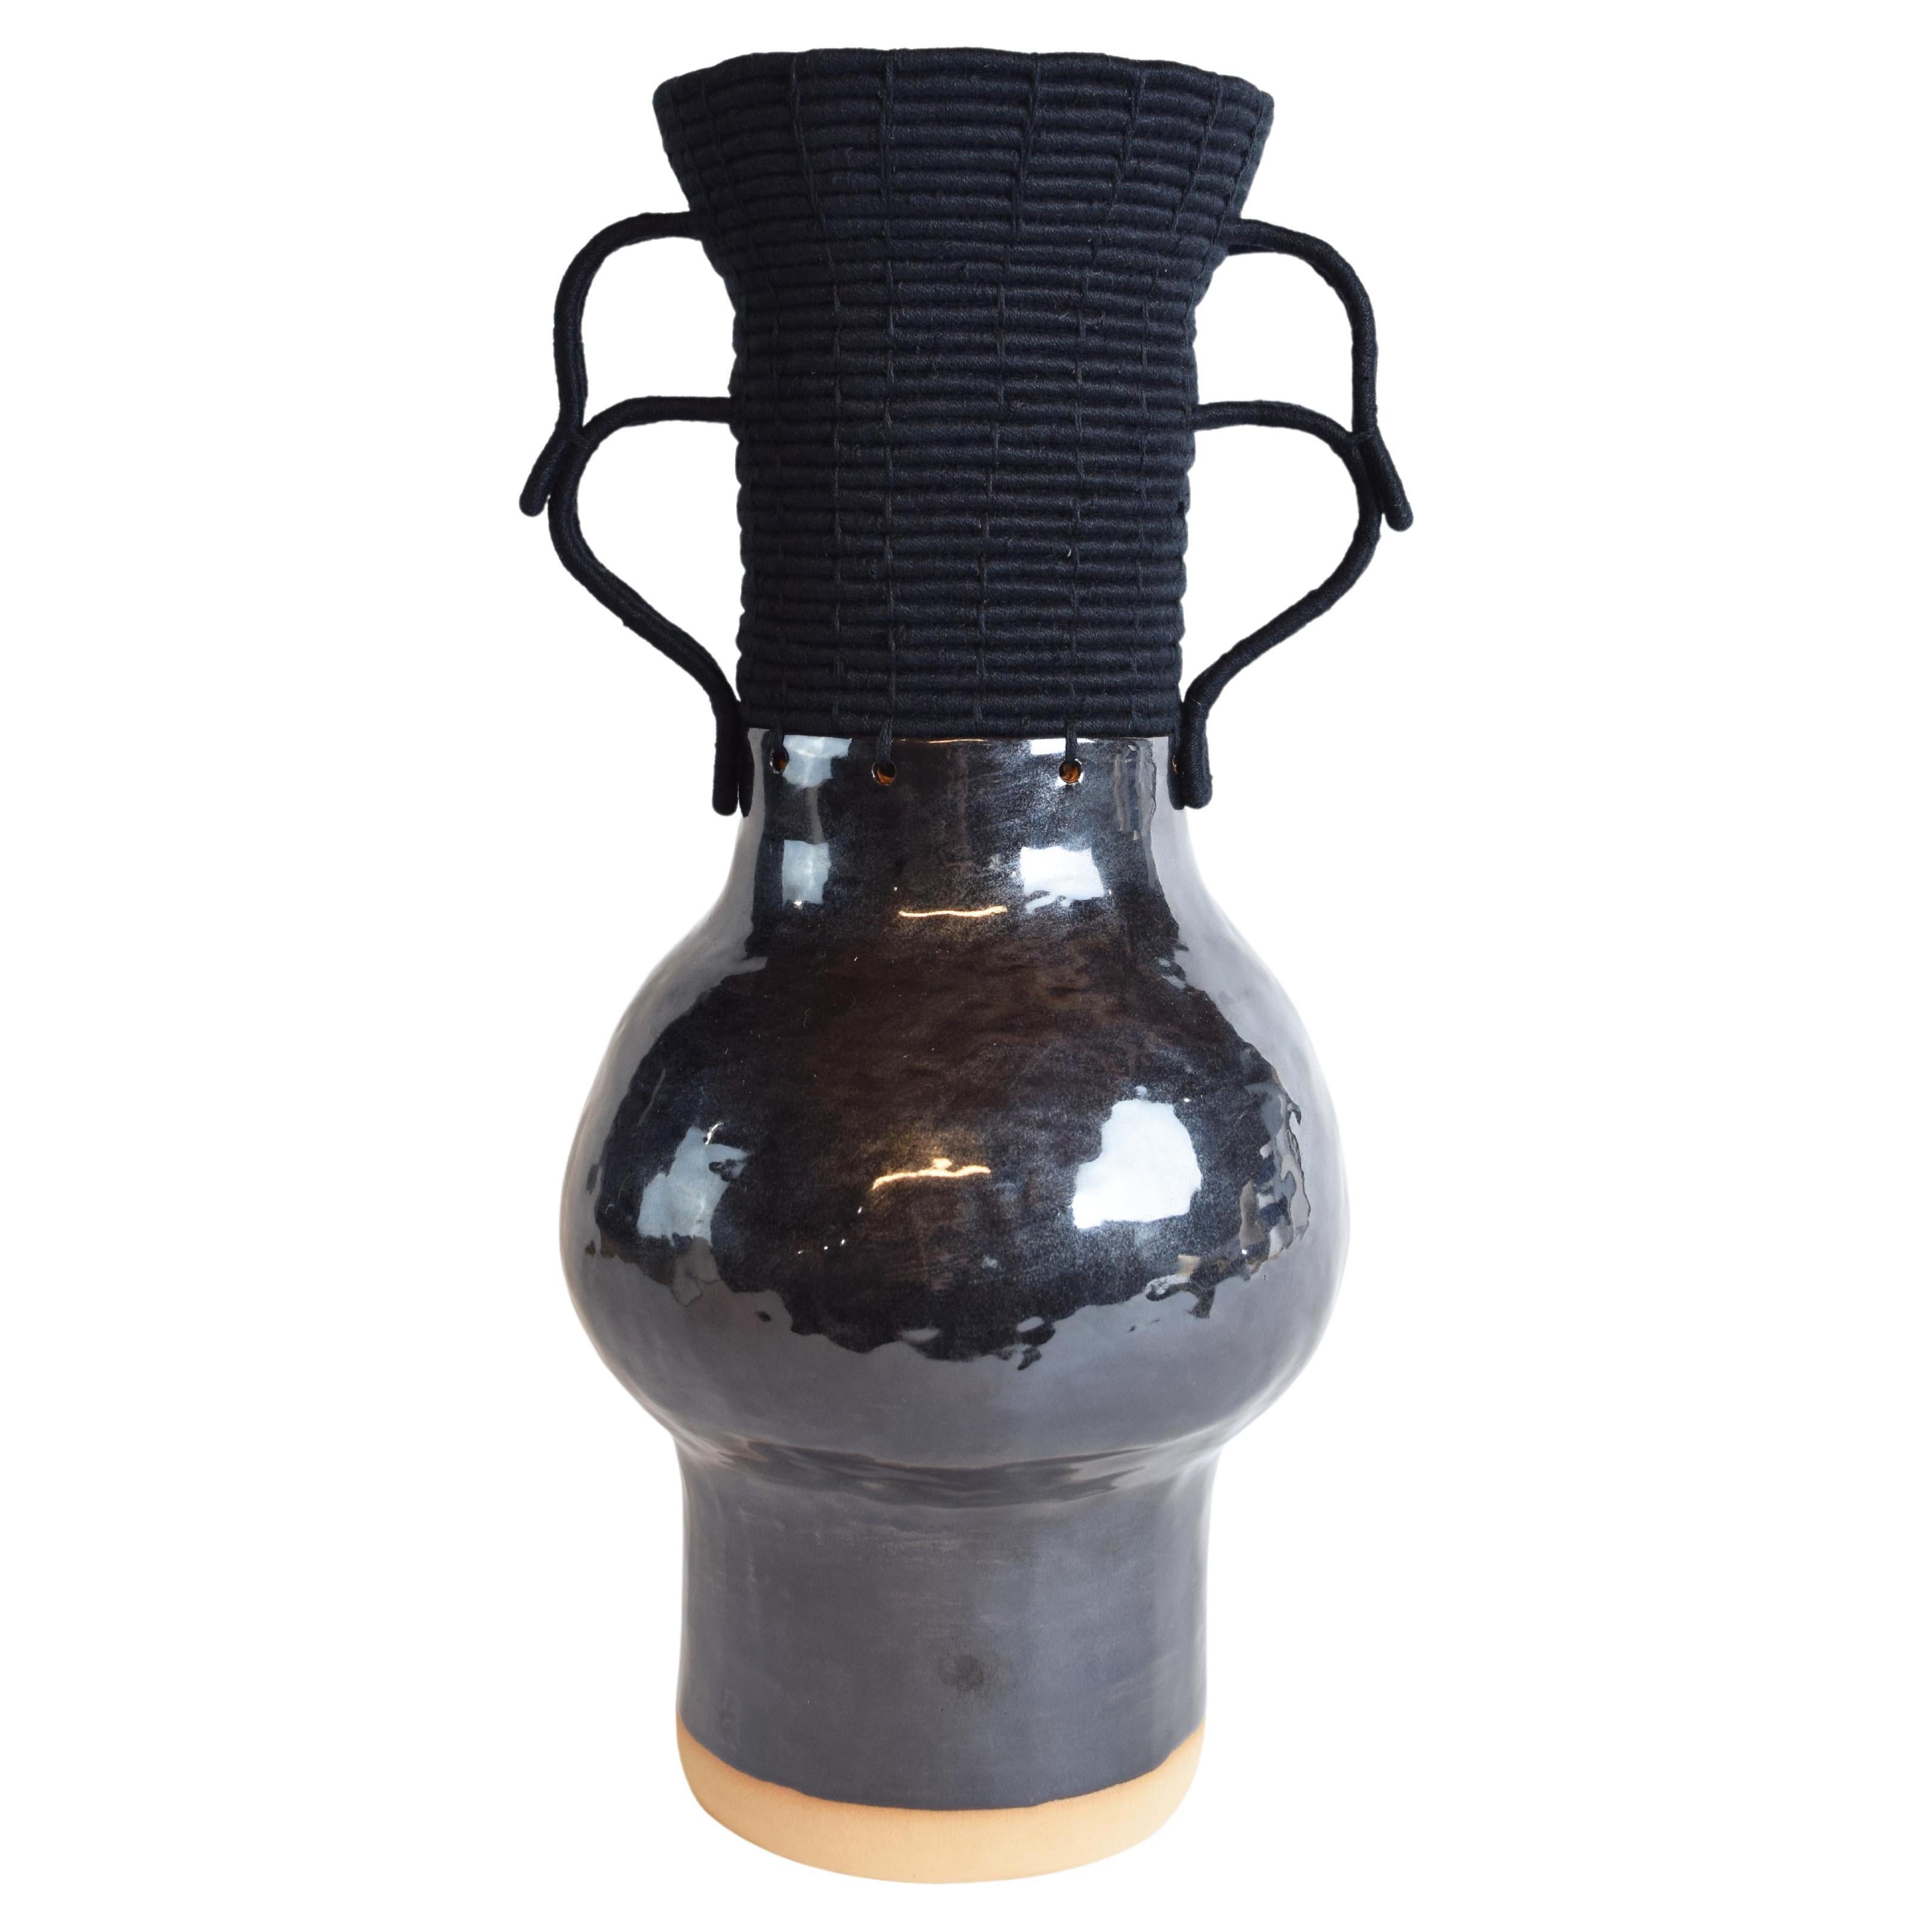 One of a Kind Vessel #752, Hand Formed Black Ceramic and Woven Black Cotton